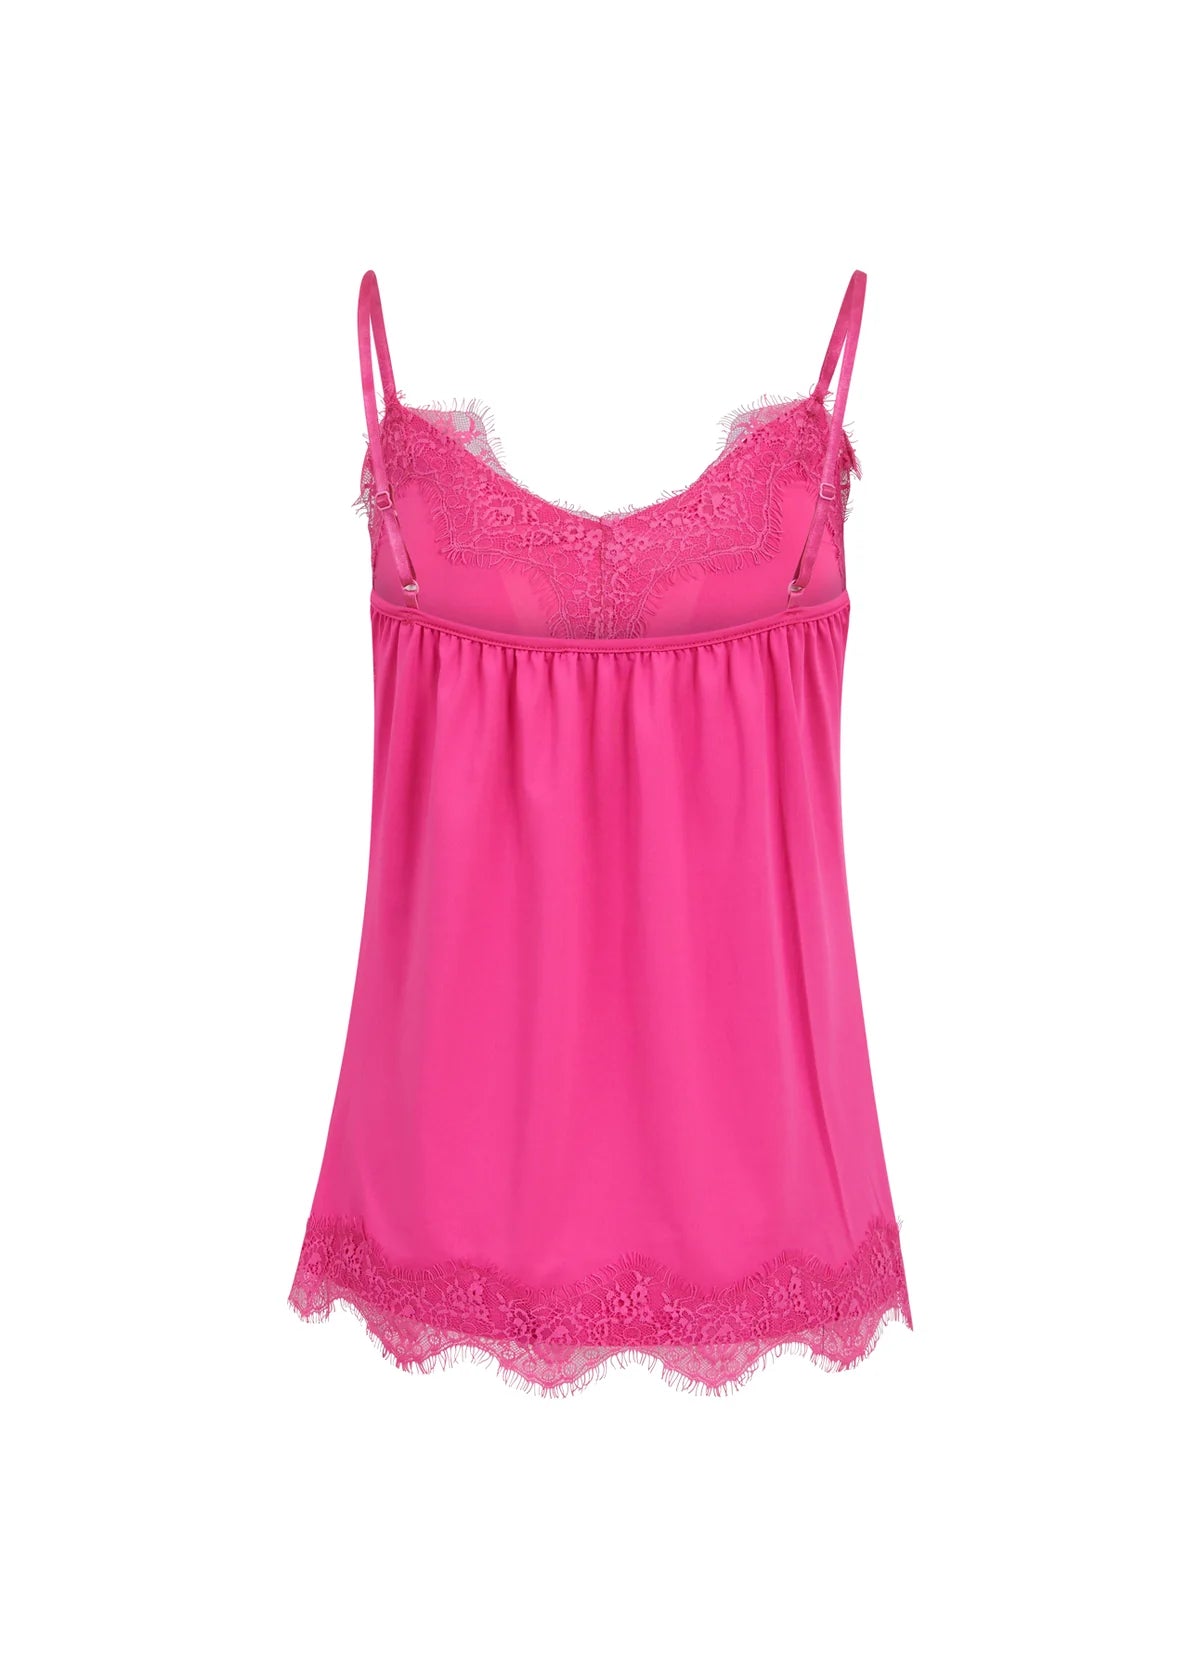 CC Heart Rosie Lace Top - Hot Pink